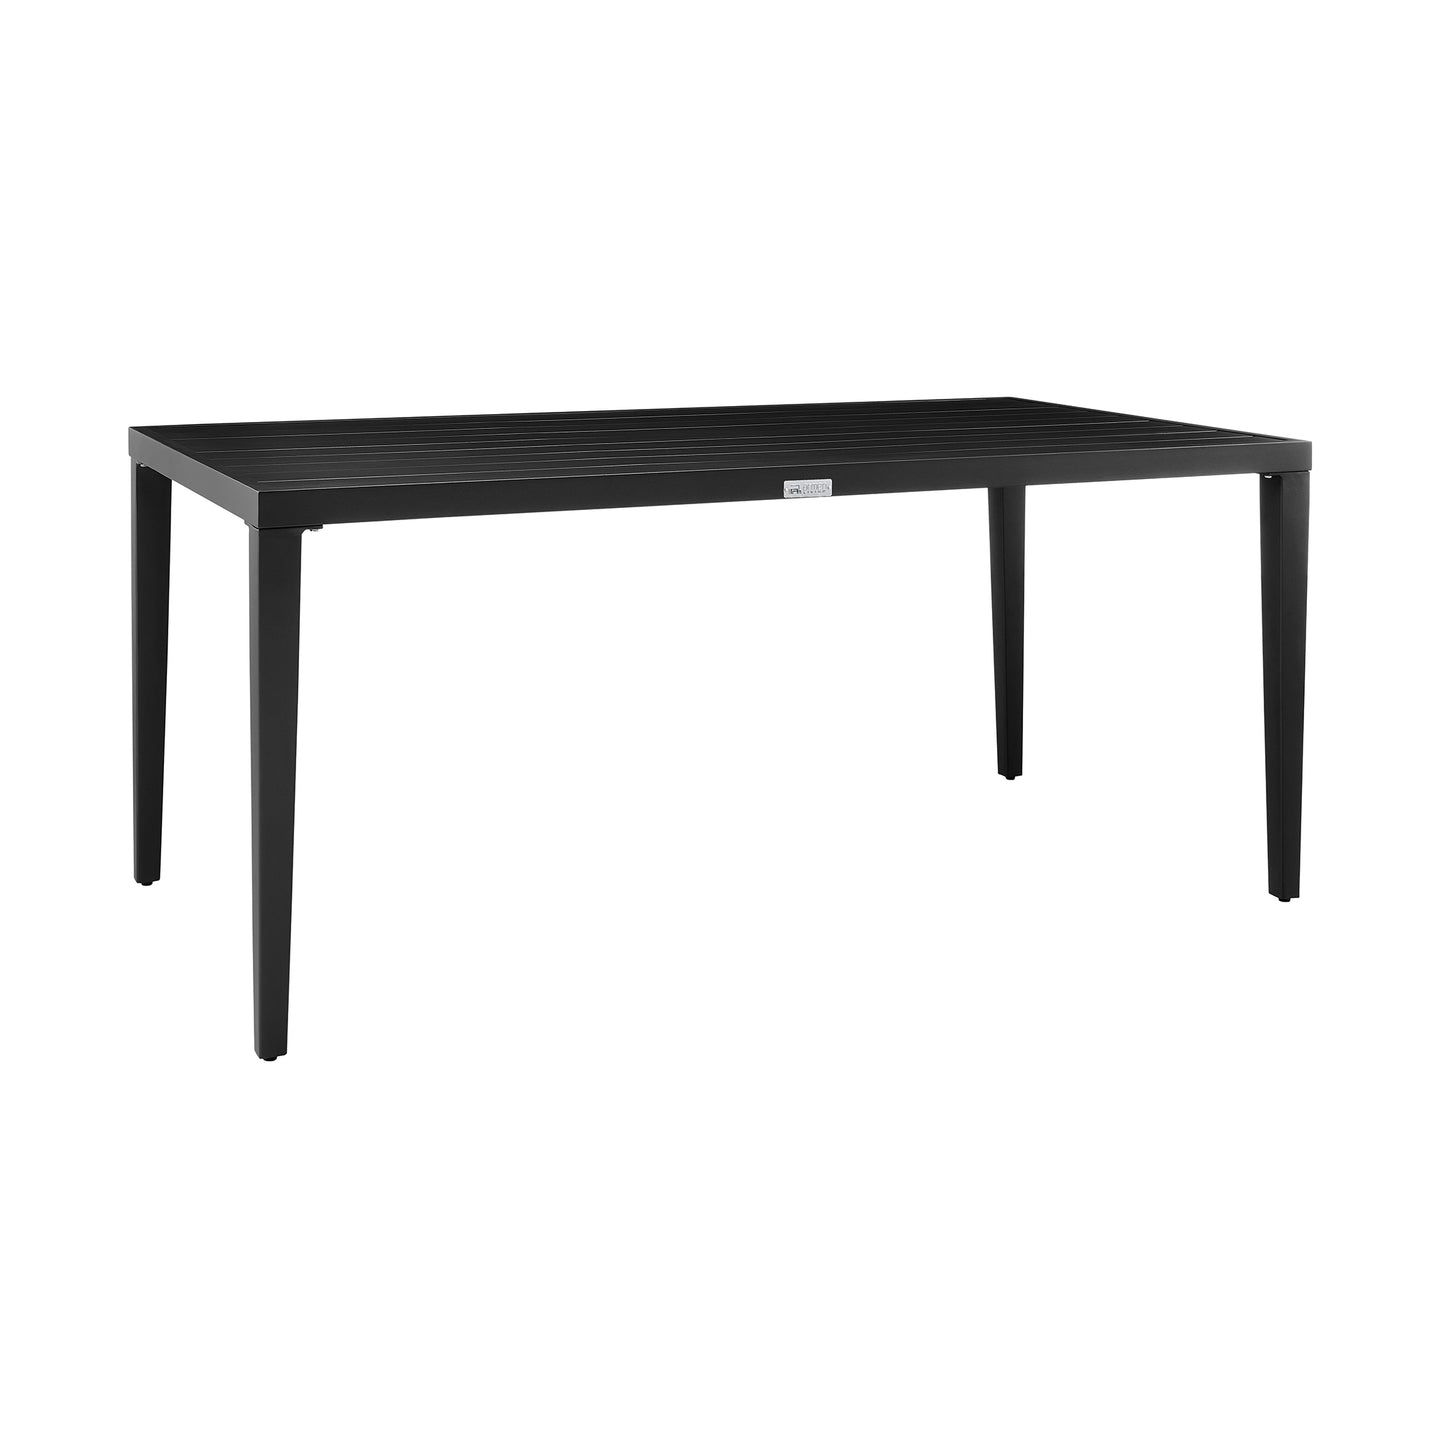 Aileen Outdoor Patio Dining Table in Aluminum